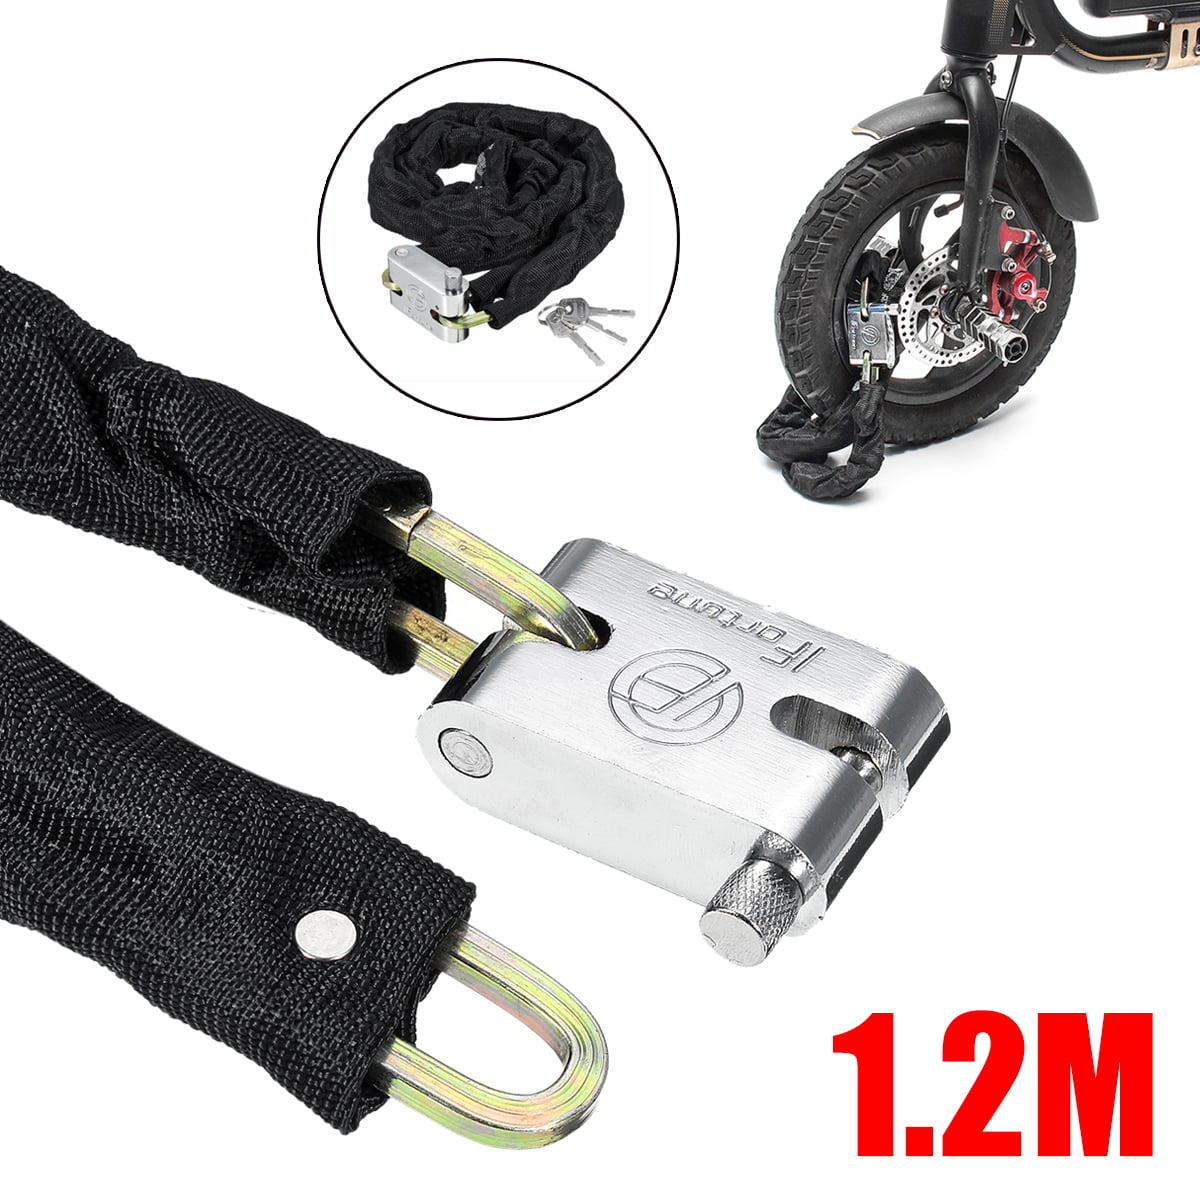 NEW MOTORCYCLE MOTORBIKE SECURITY PADLOCK AND CHAIN 1.2M 